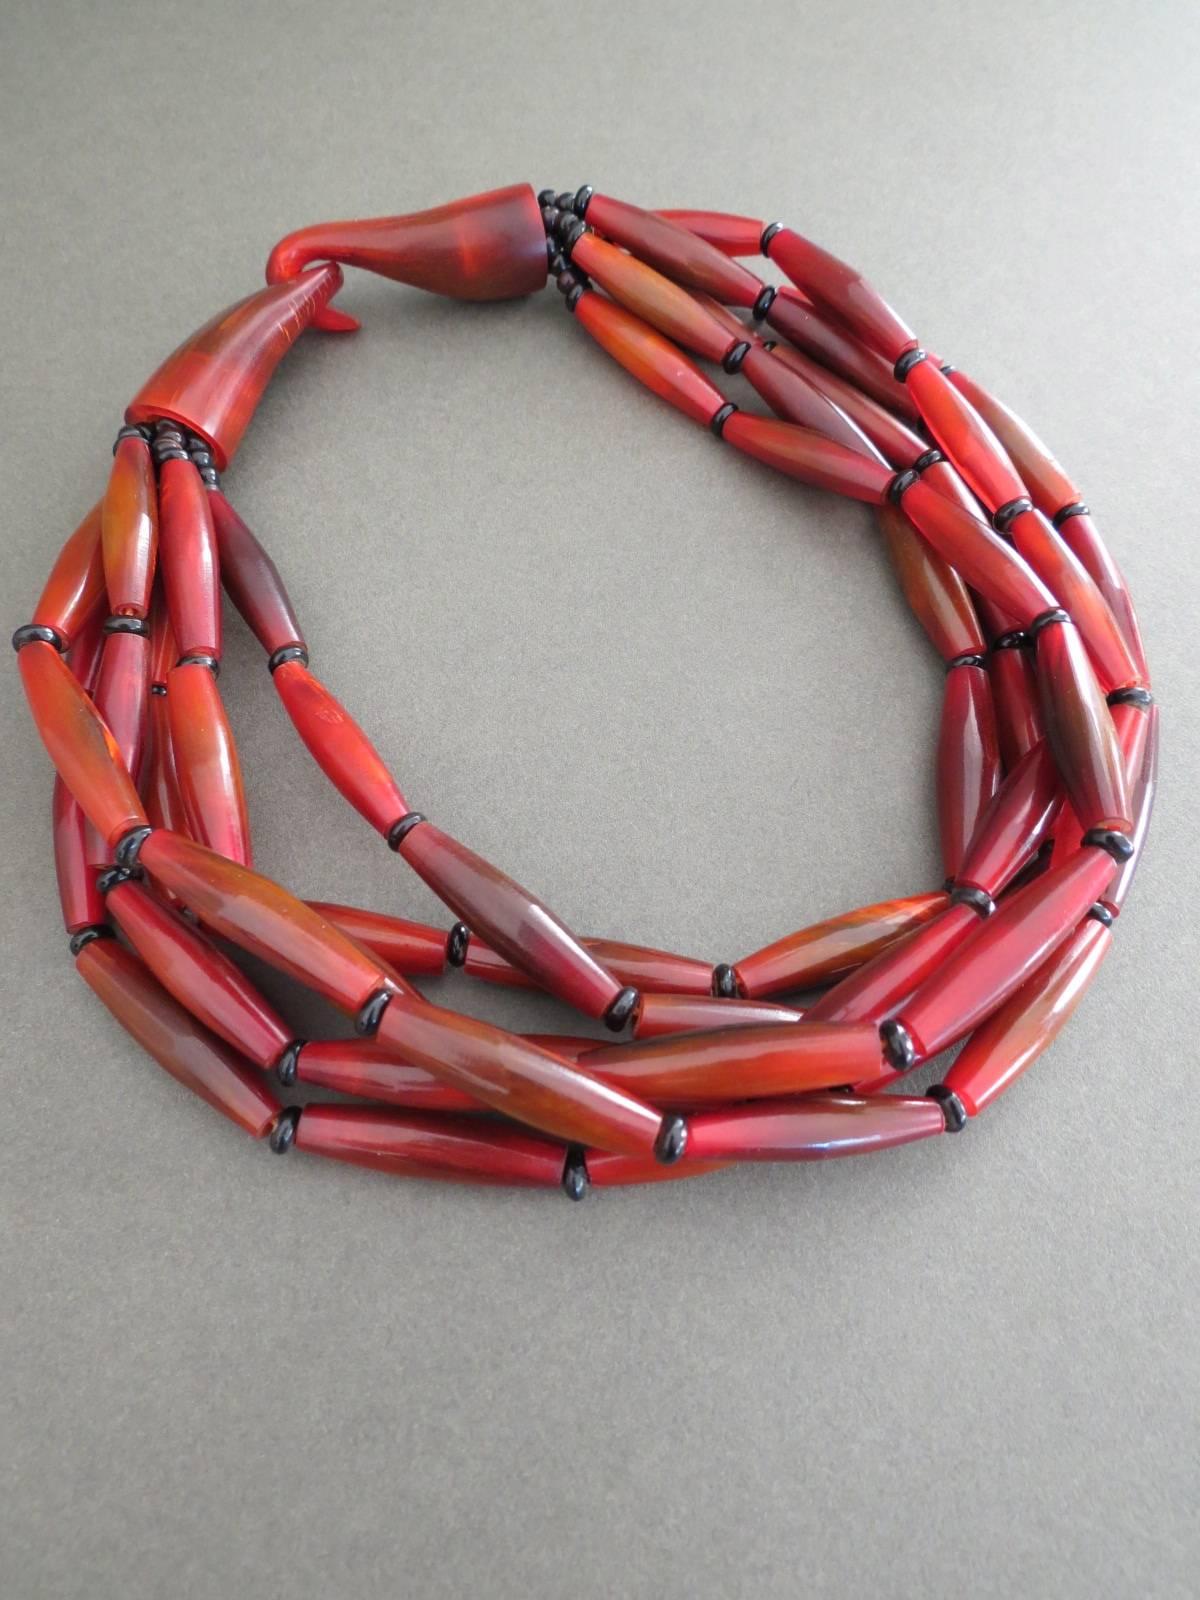 Danish Monies Gerda Lynggaard Bone Choker Necklace In Excellent Condition For Sale In Hove, GB